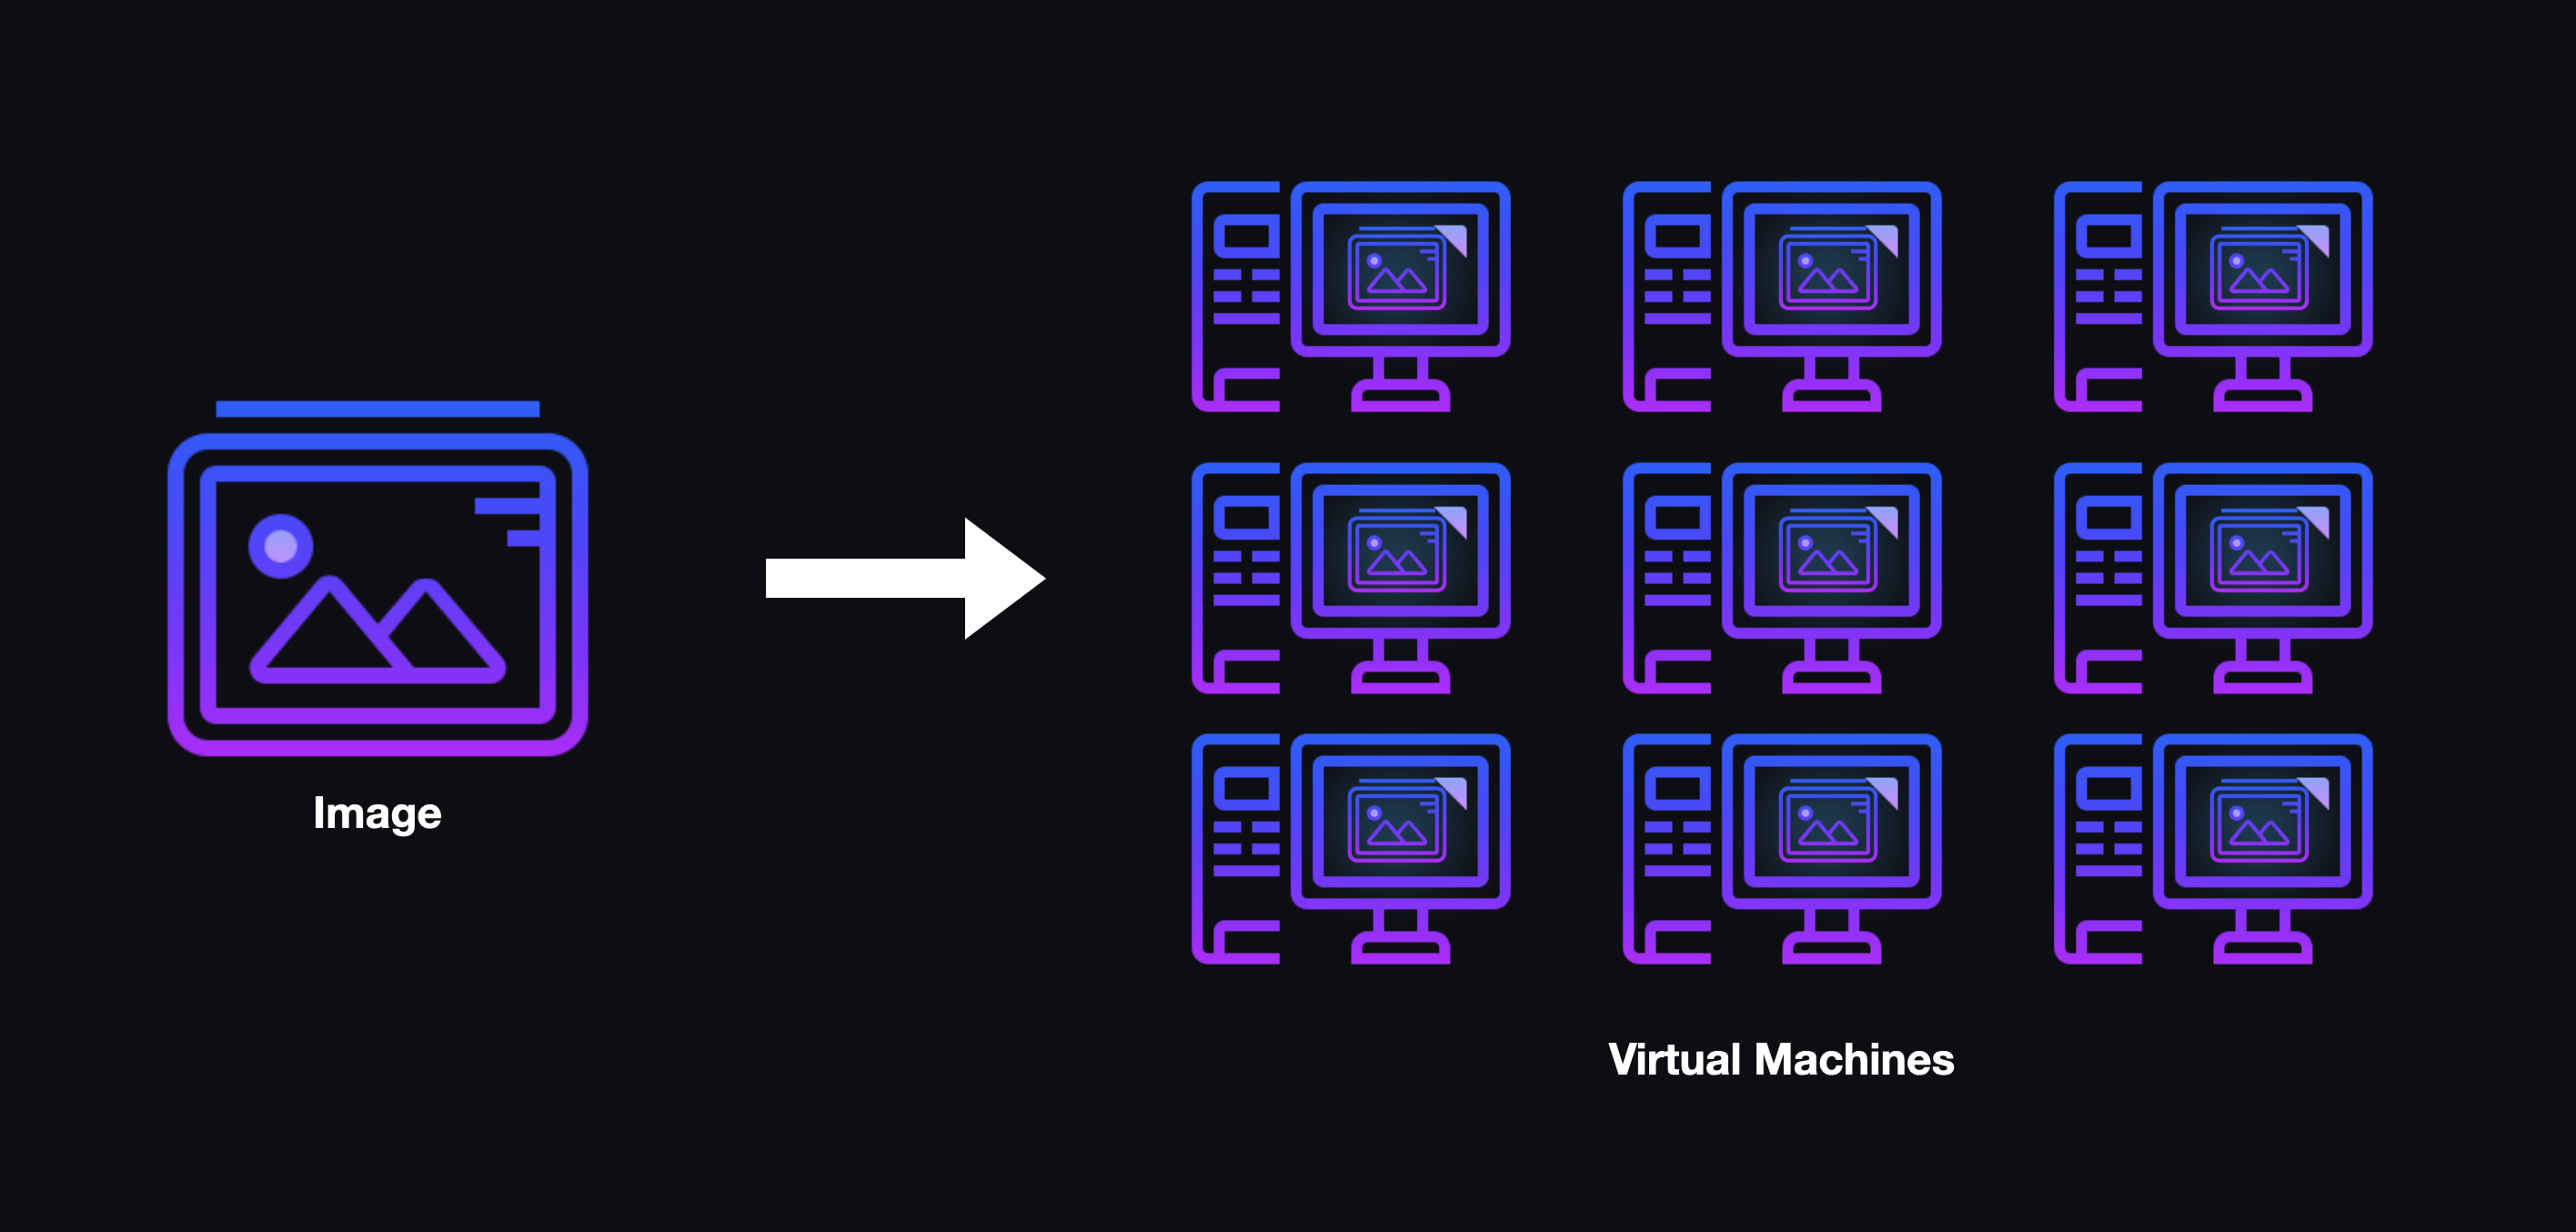 An image being applied to 9 individual virtual machines.